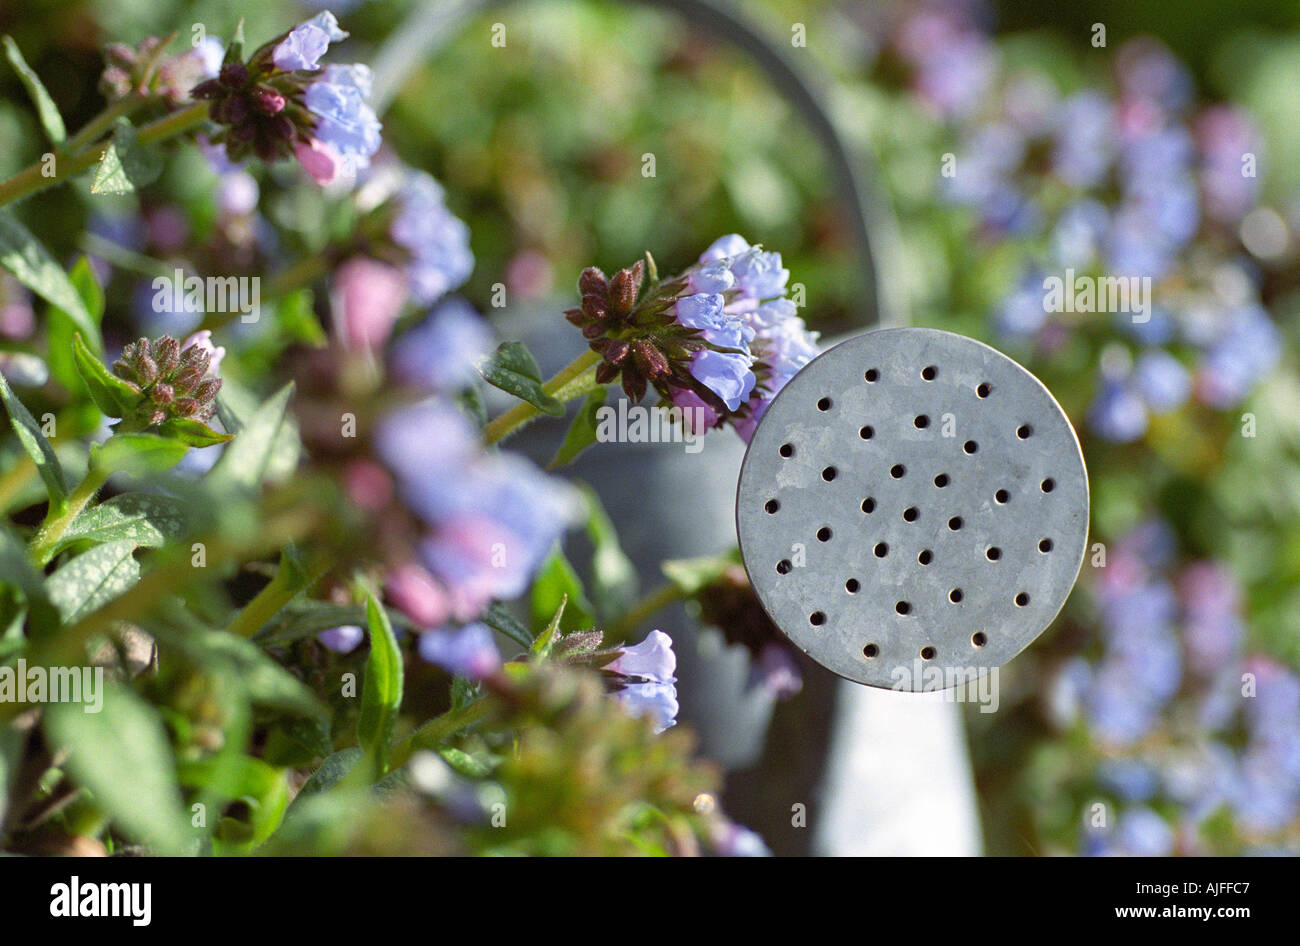 Watering can spout Stock Photo